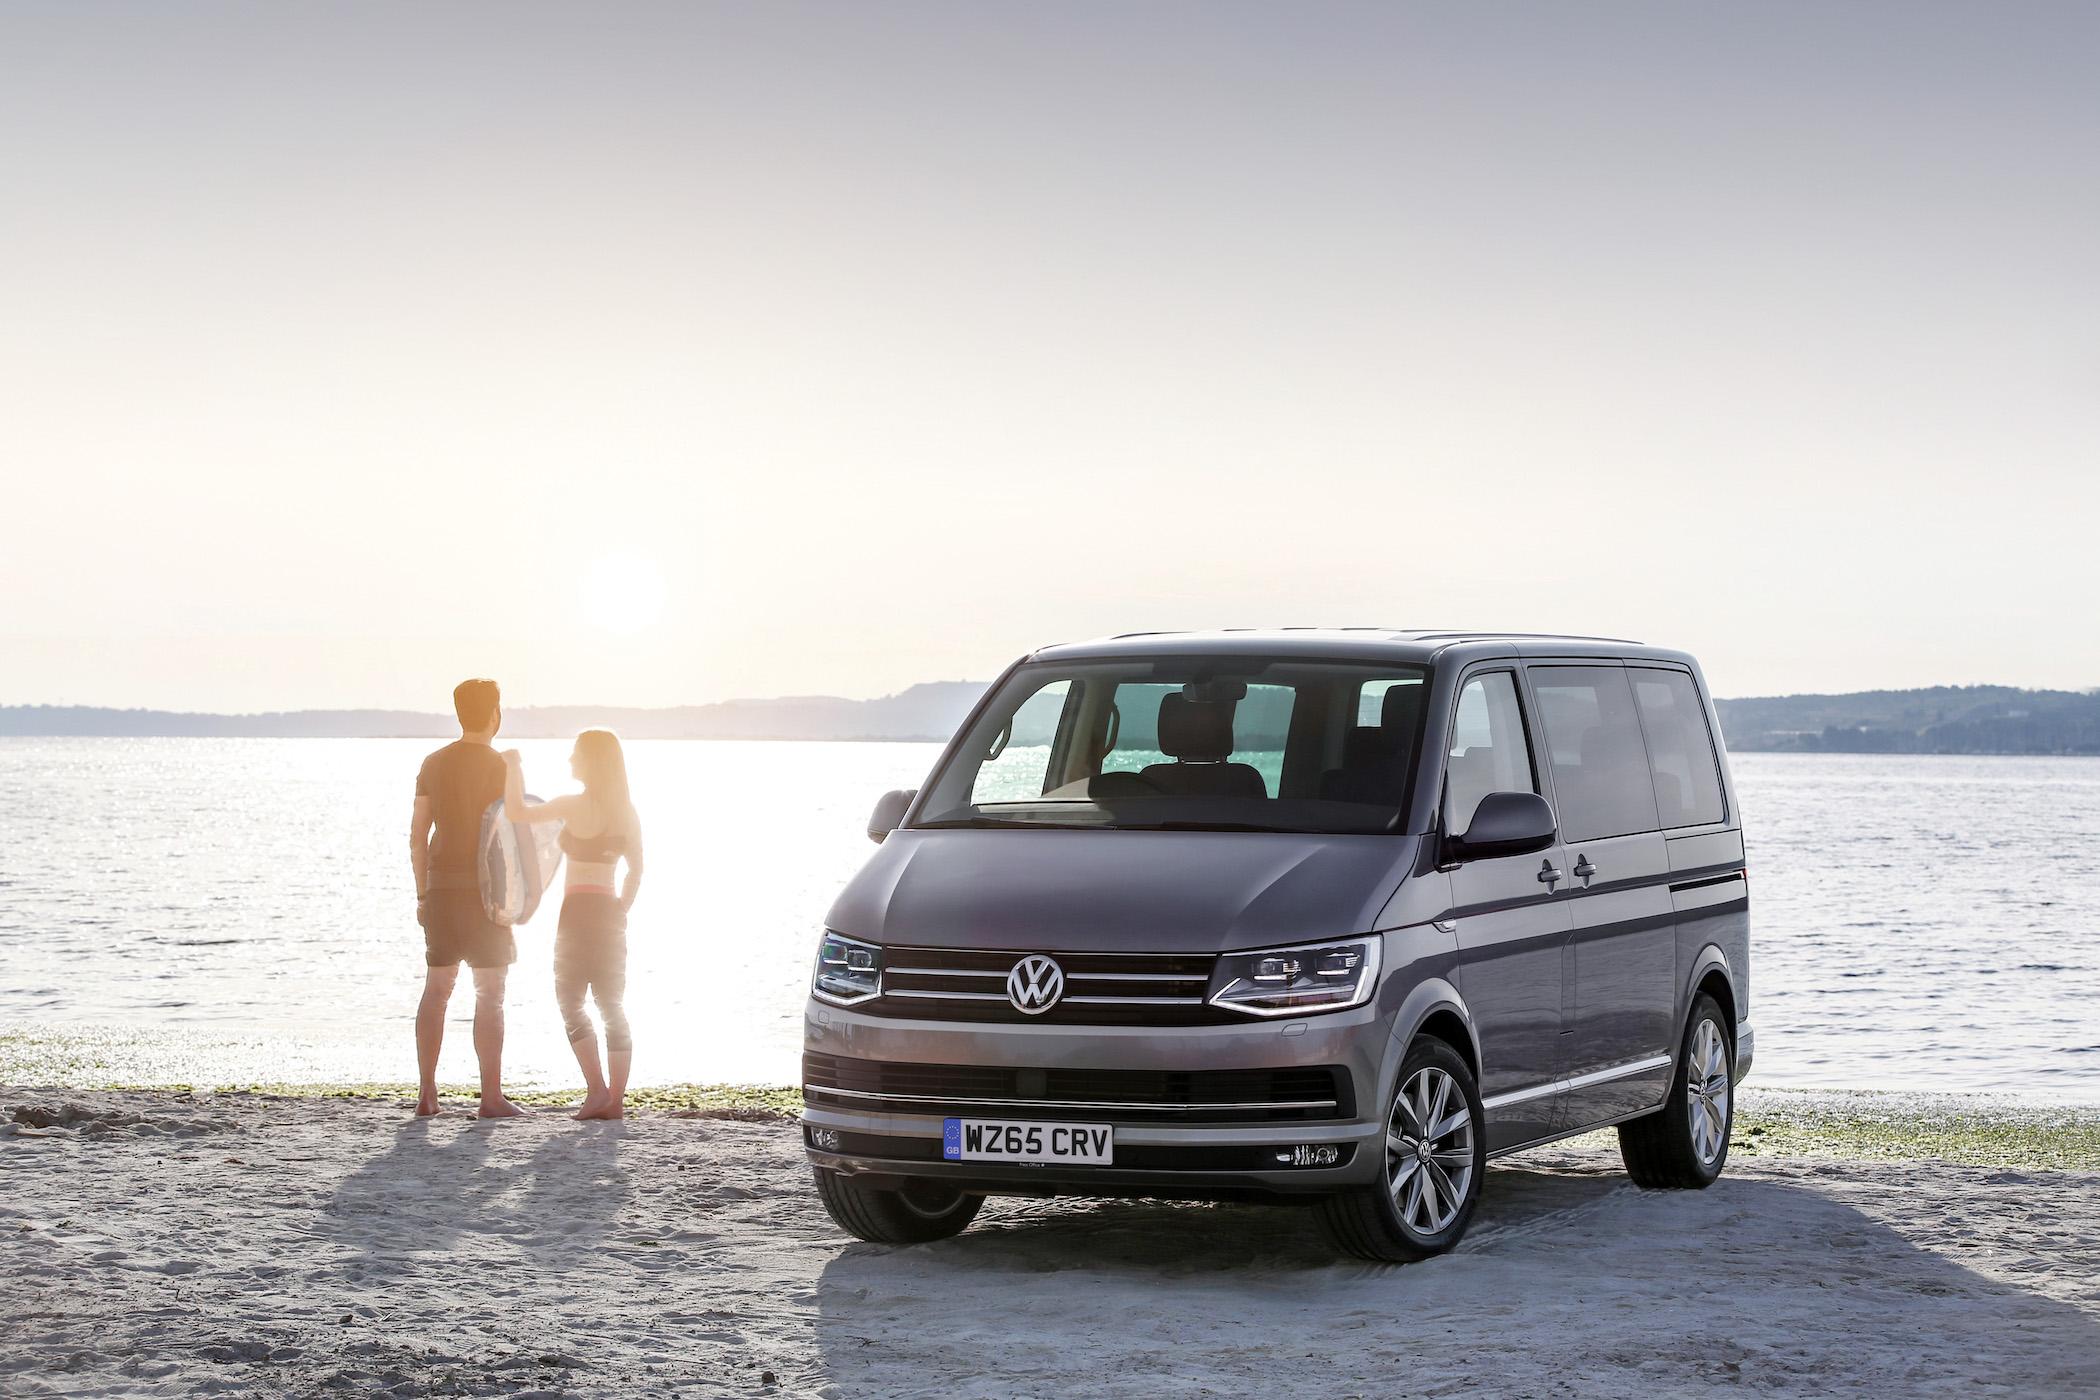 volkswagen caravelle on the beach next to two people